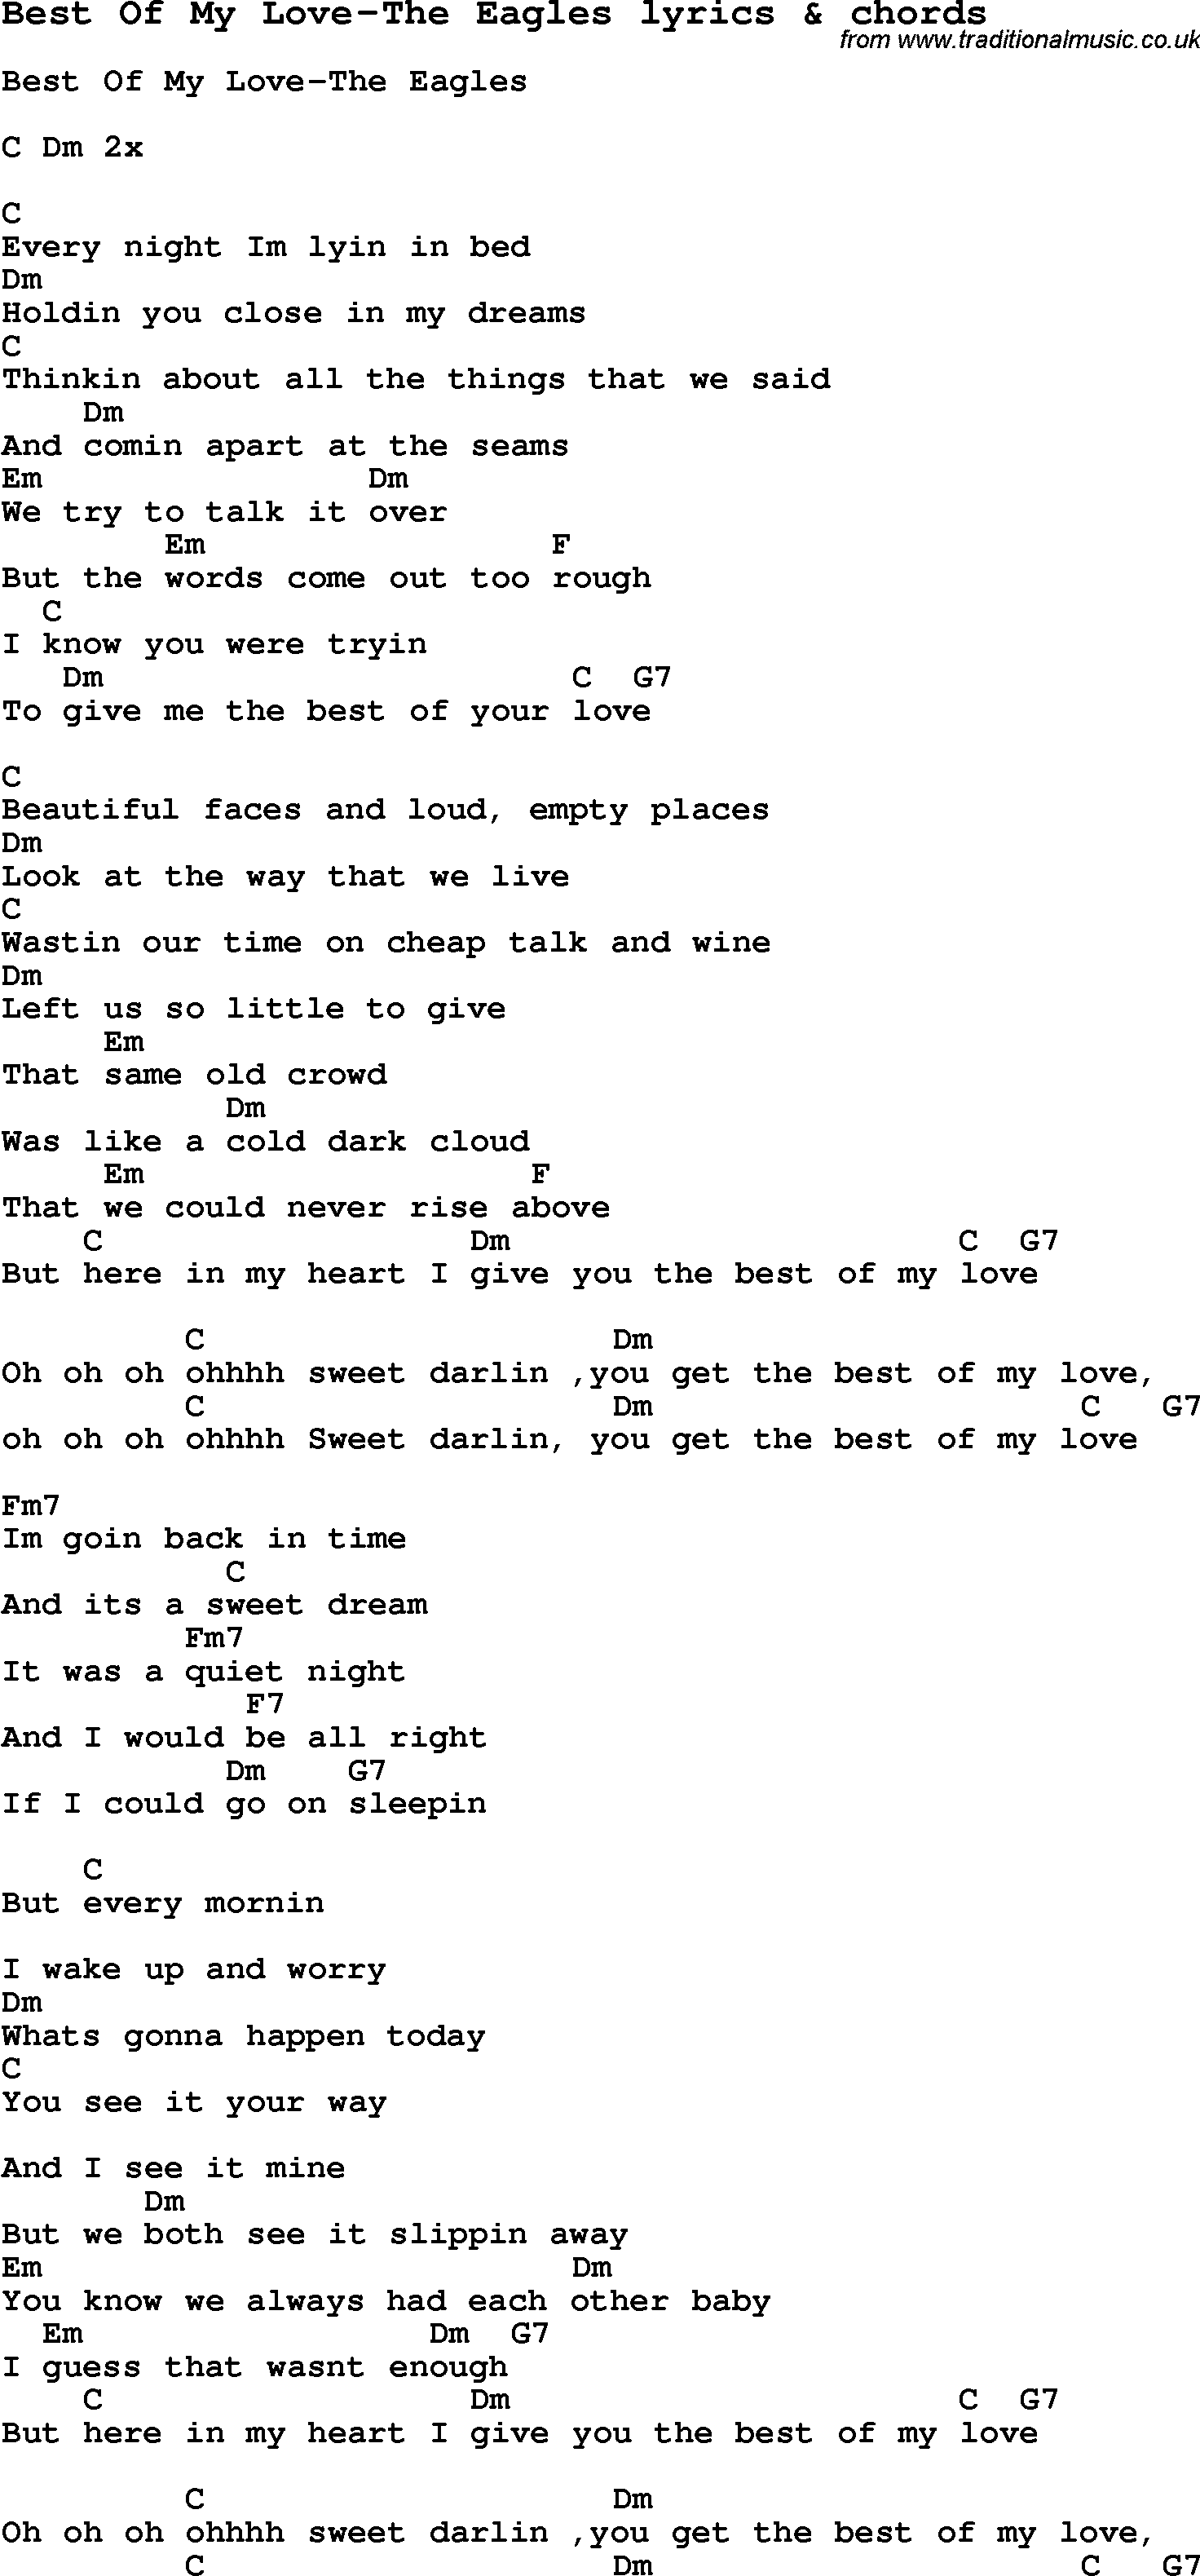 Love Song Lyrics for: Best Of My Love-The Eagles with chords for Ukulele, Guitar Banjo etc.